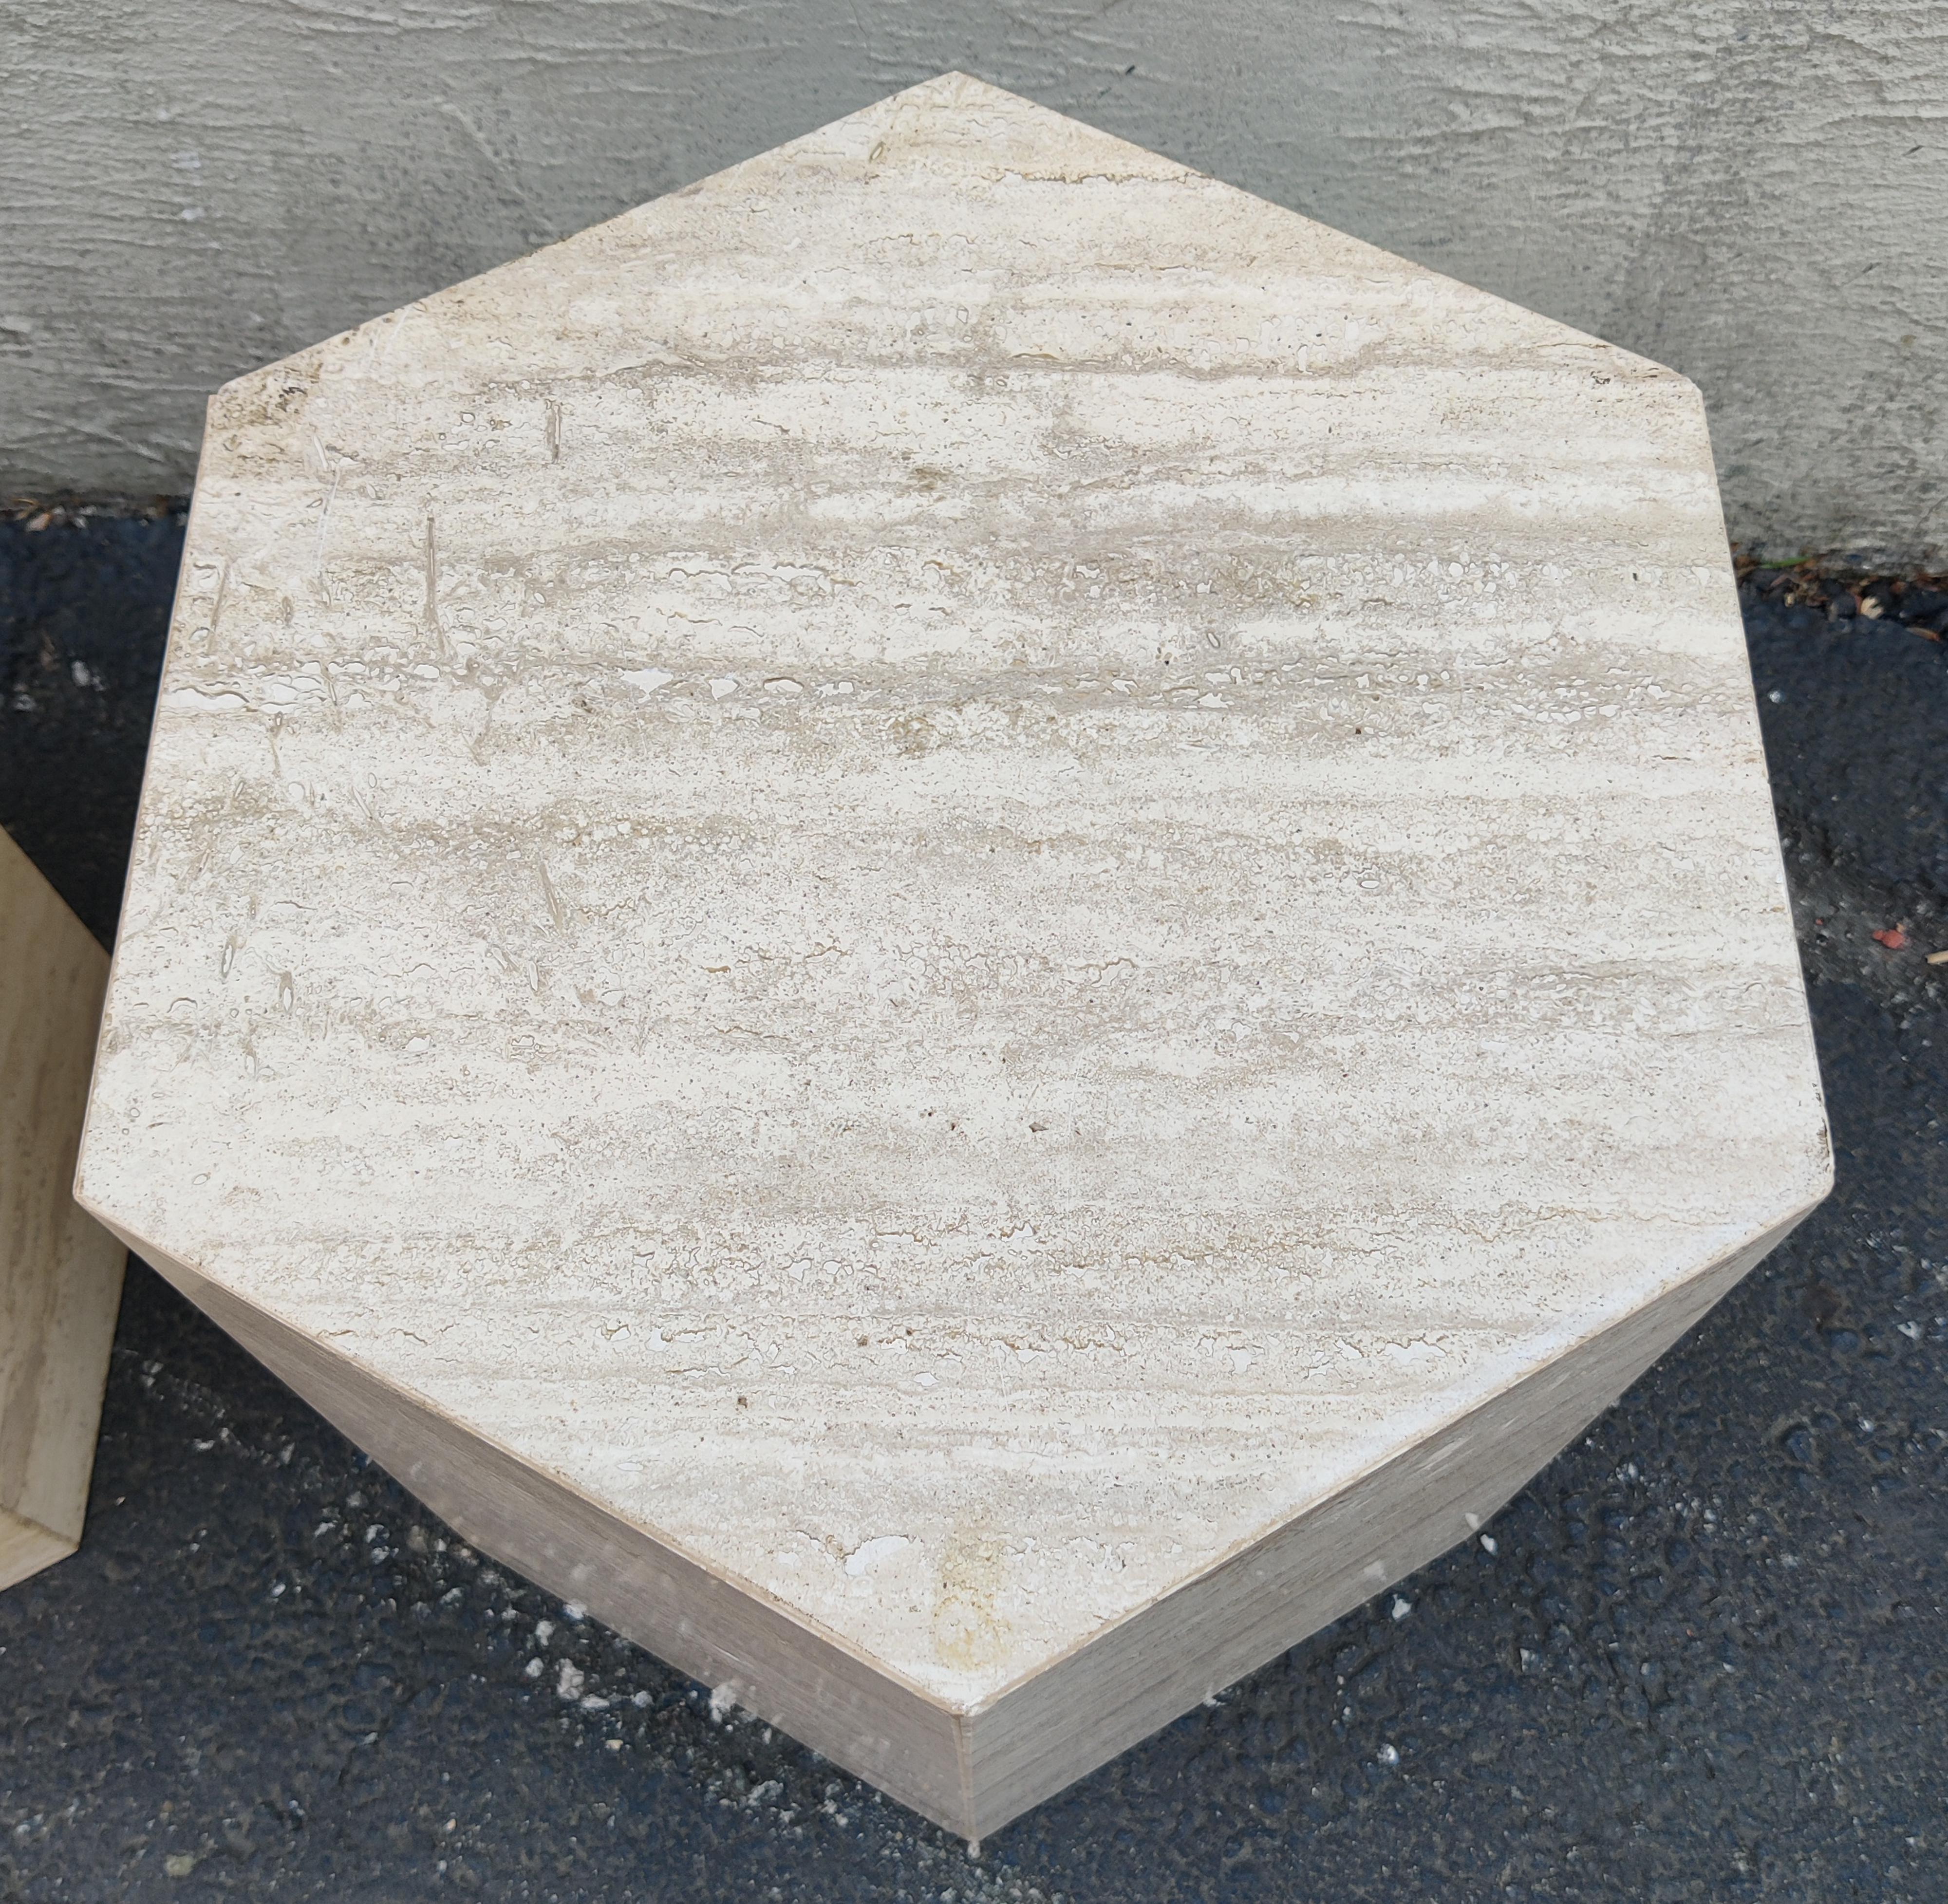 Pair Matching Post-Modern Italian Travertine Marble Hexagonal Side Tables, 1970s For Sale 3